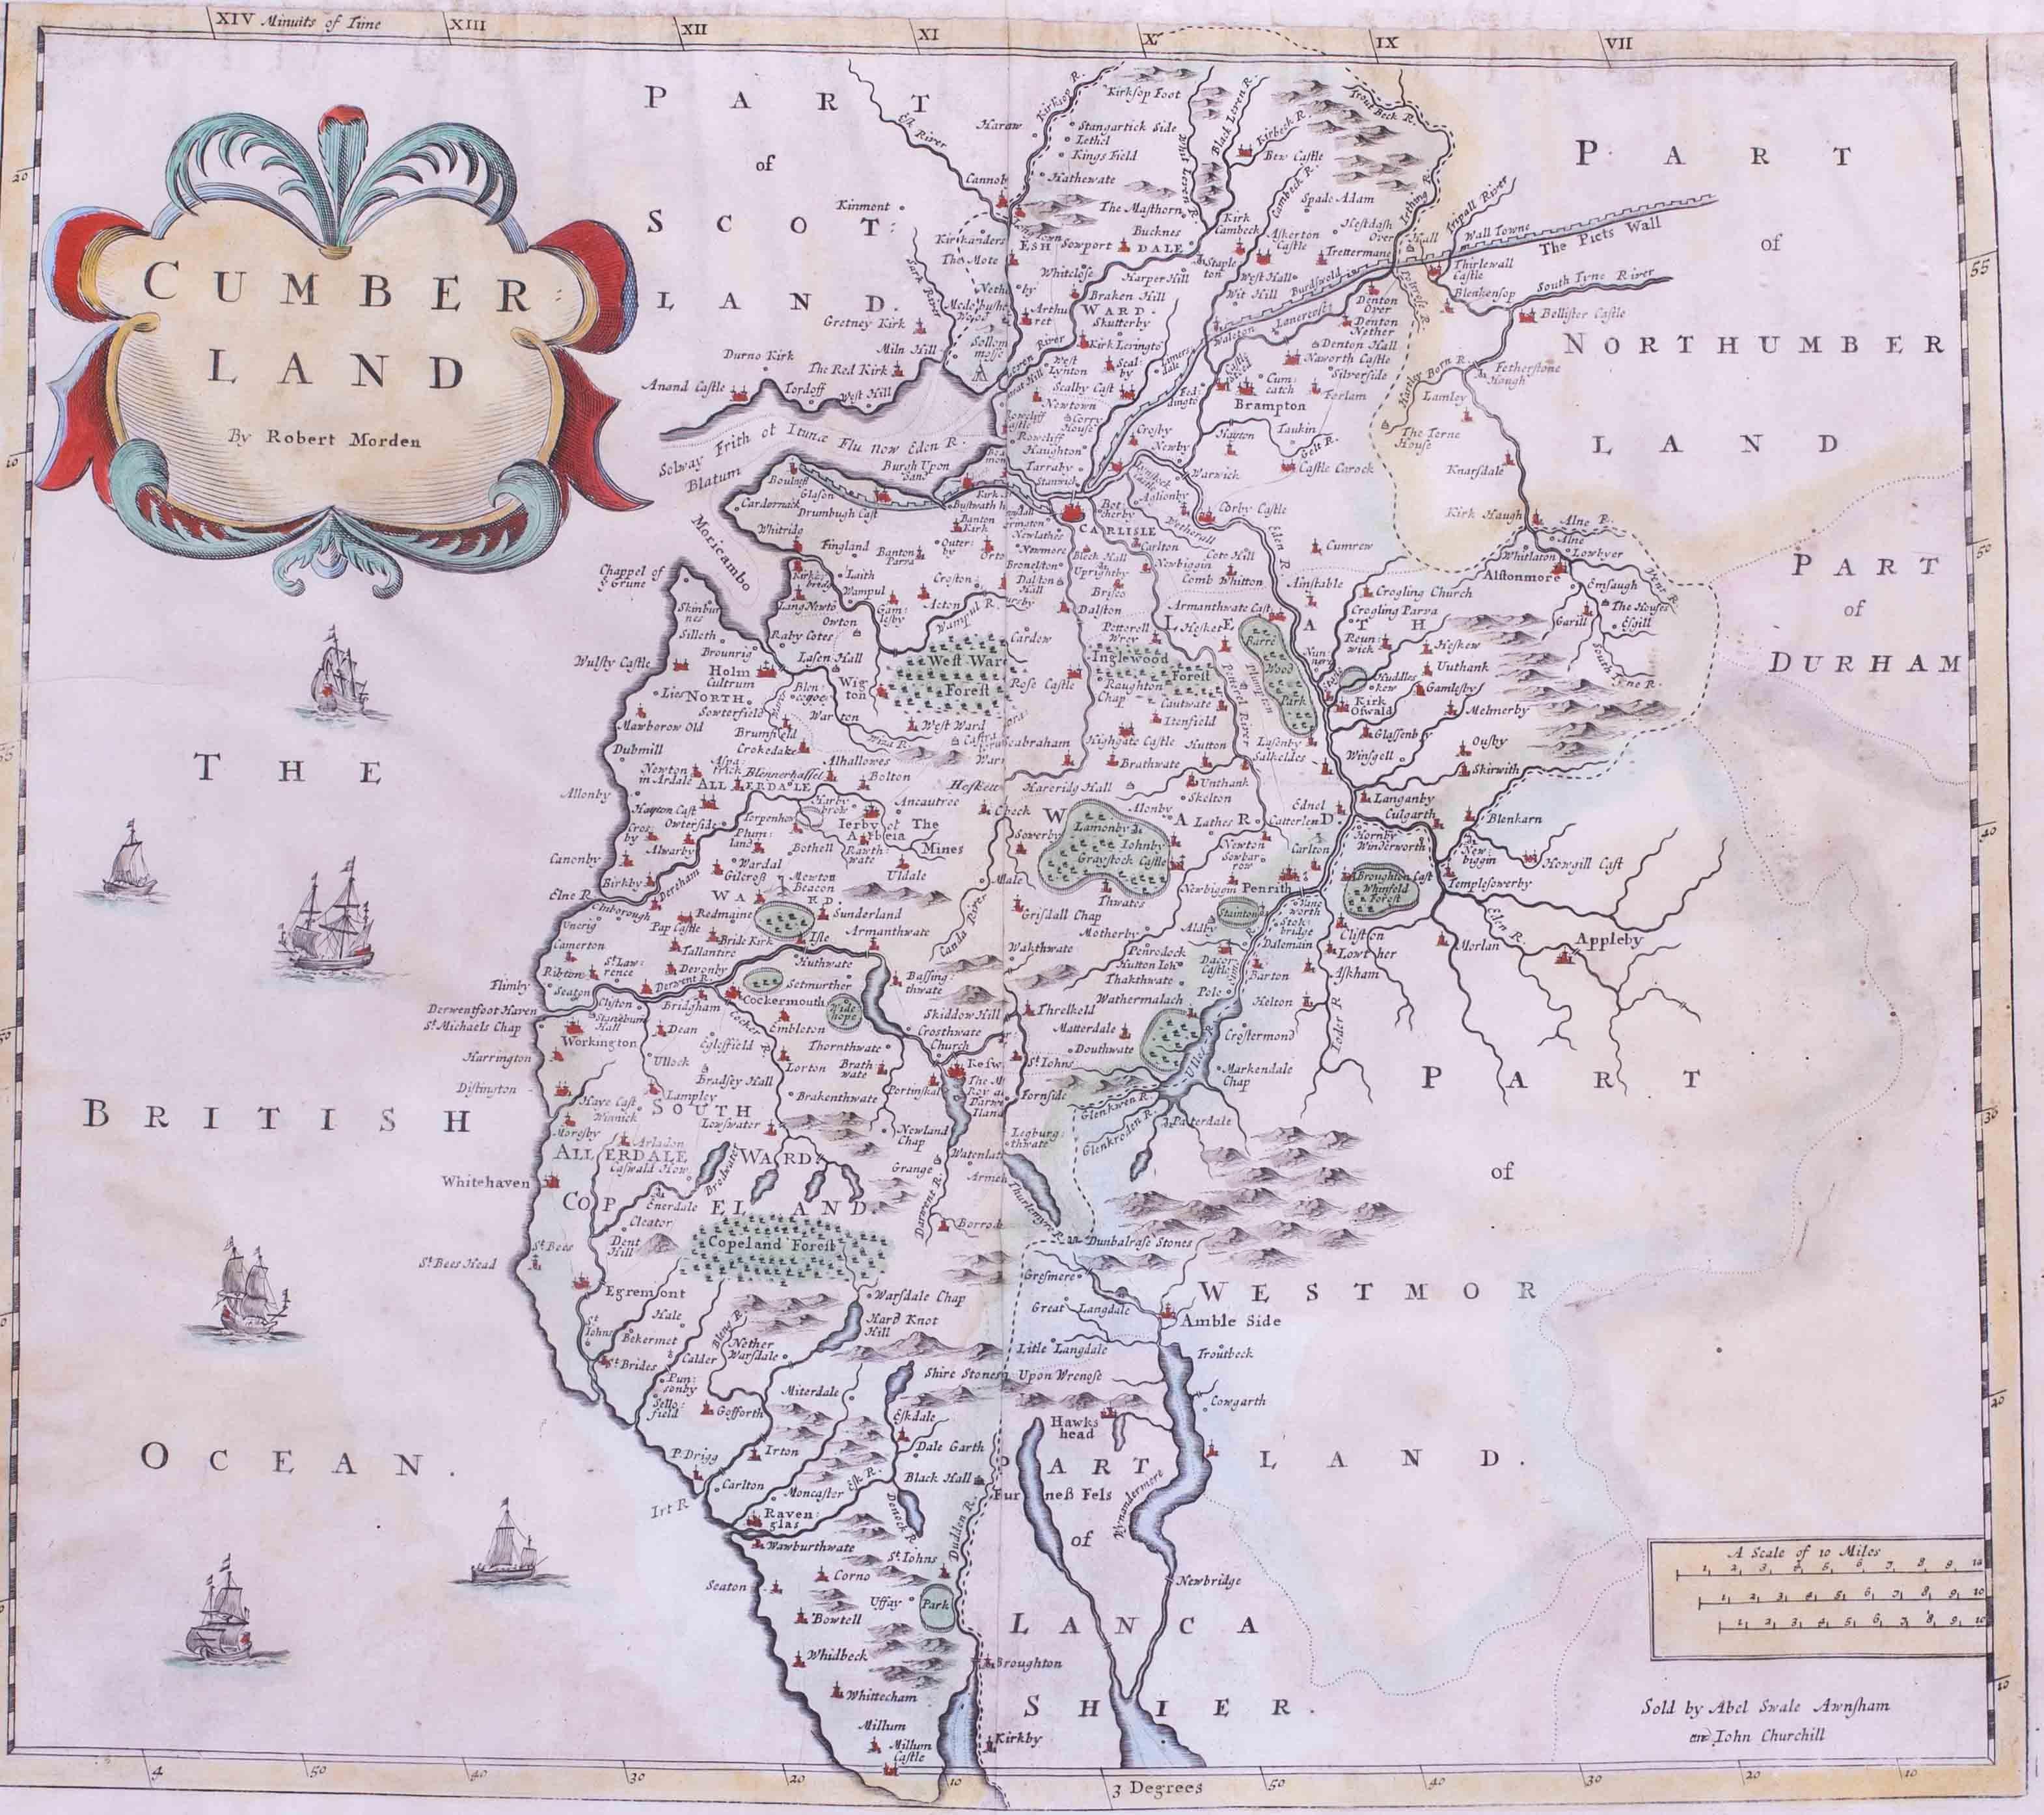 17th Century map of Cumberland, UK by Robert Morden - Gray Landscape Print by Unknown